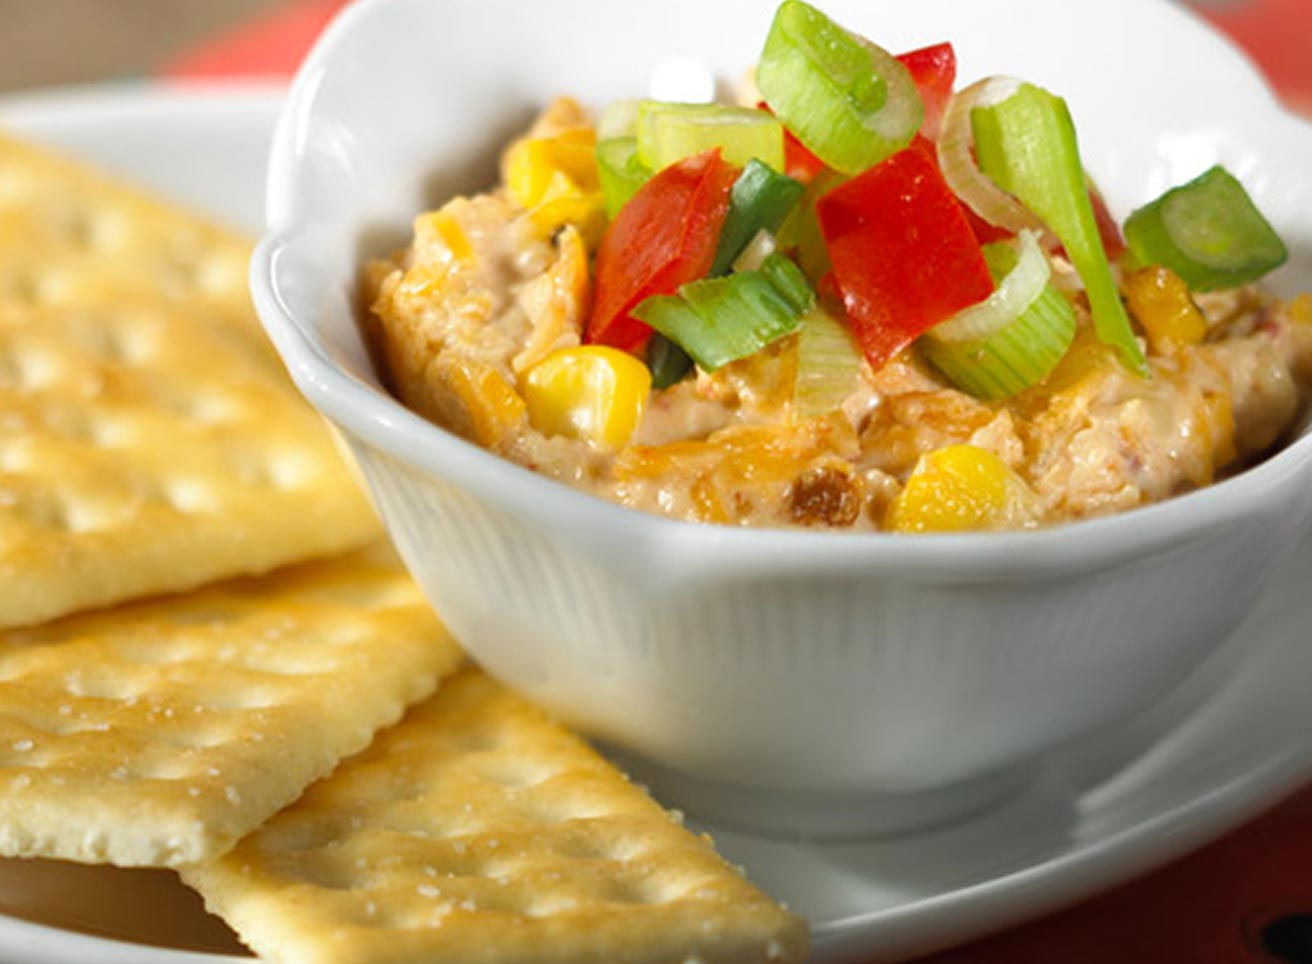 Baked Cheese and Chili Pepper Dip